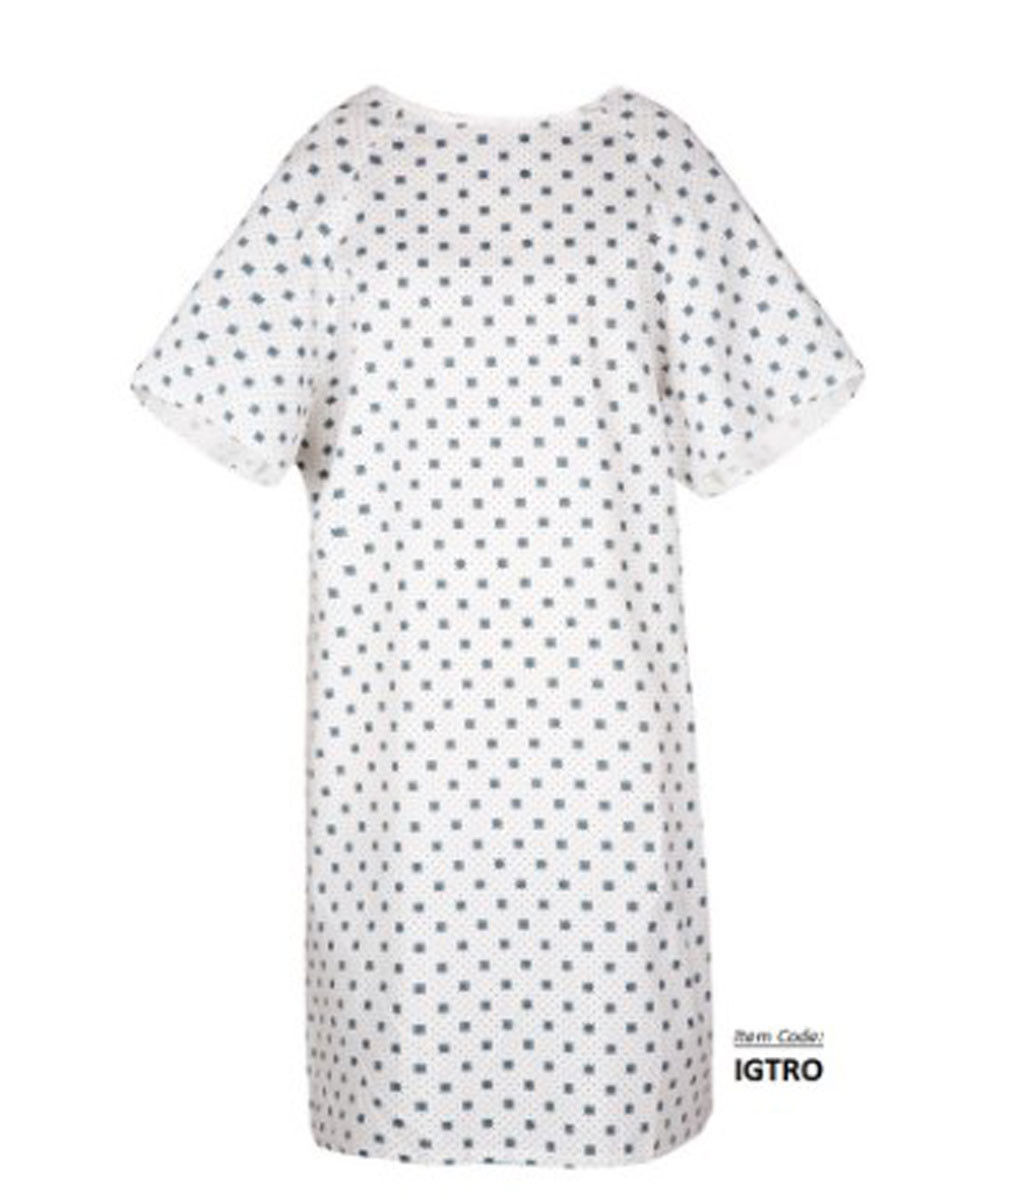 What is the ideal setting for using this hospital patient gown?